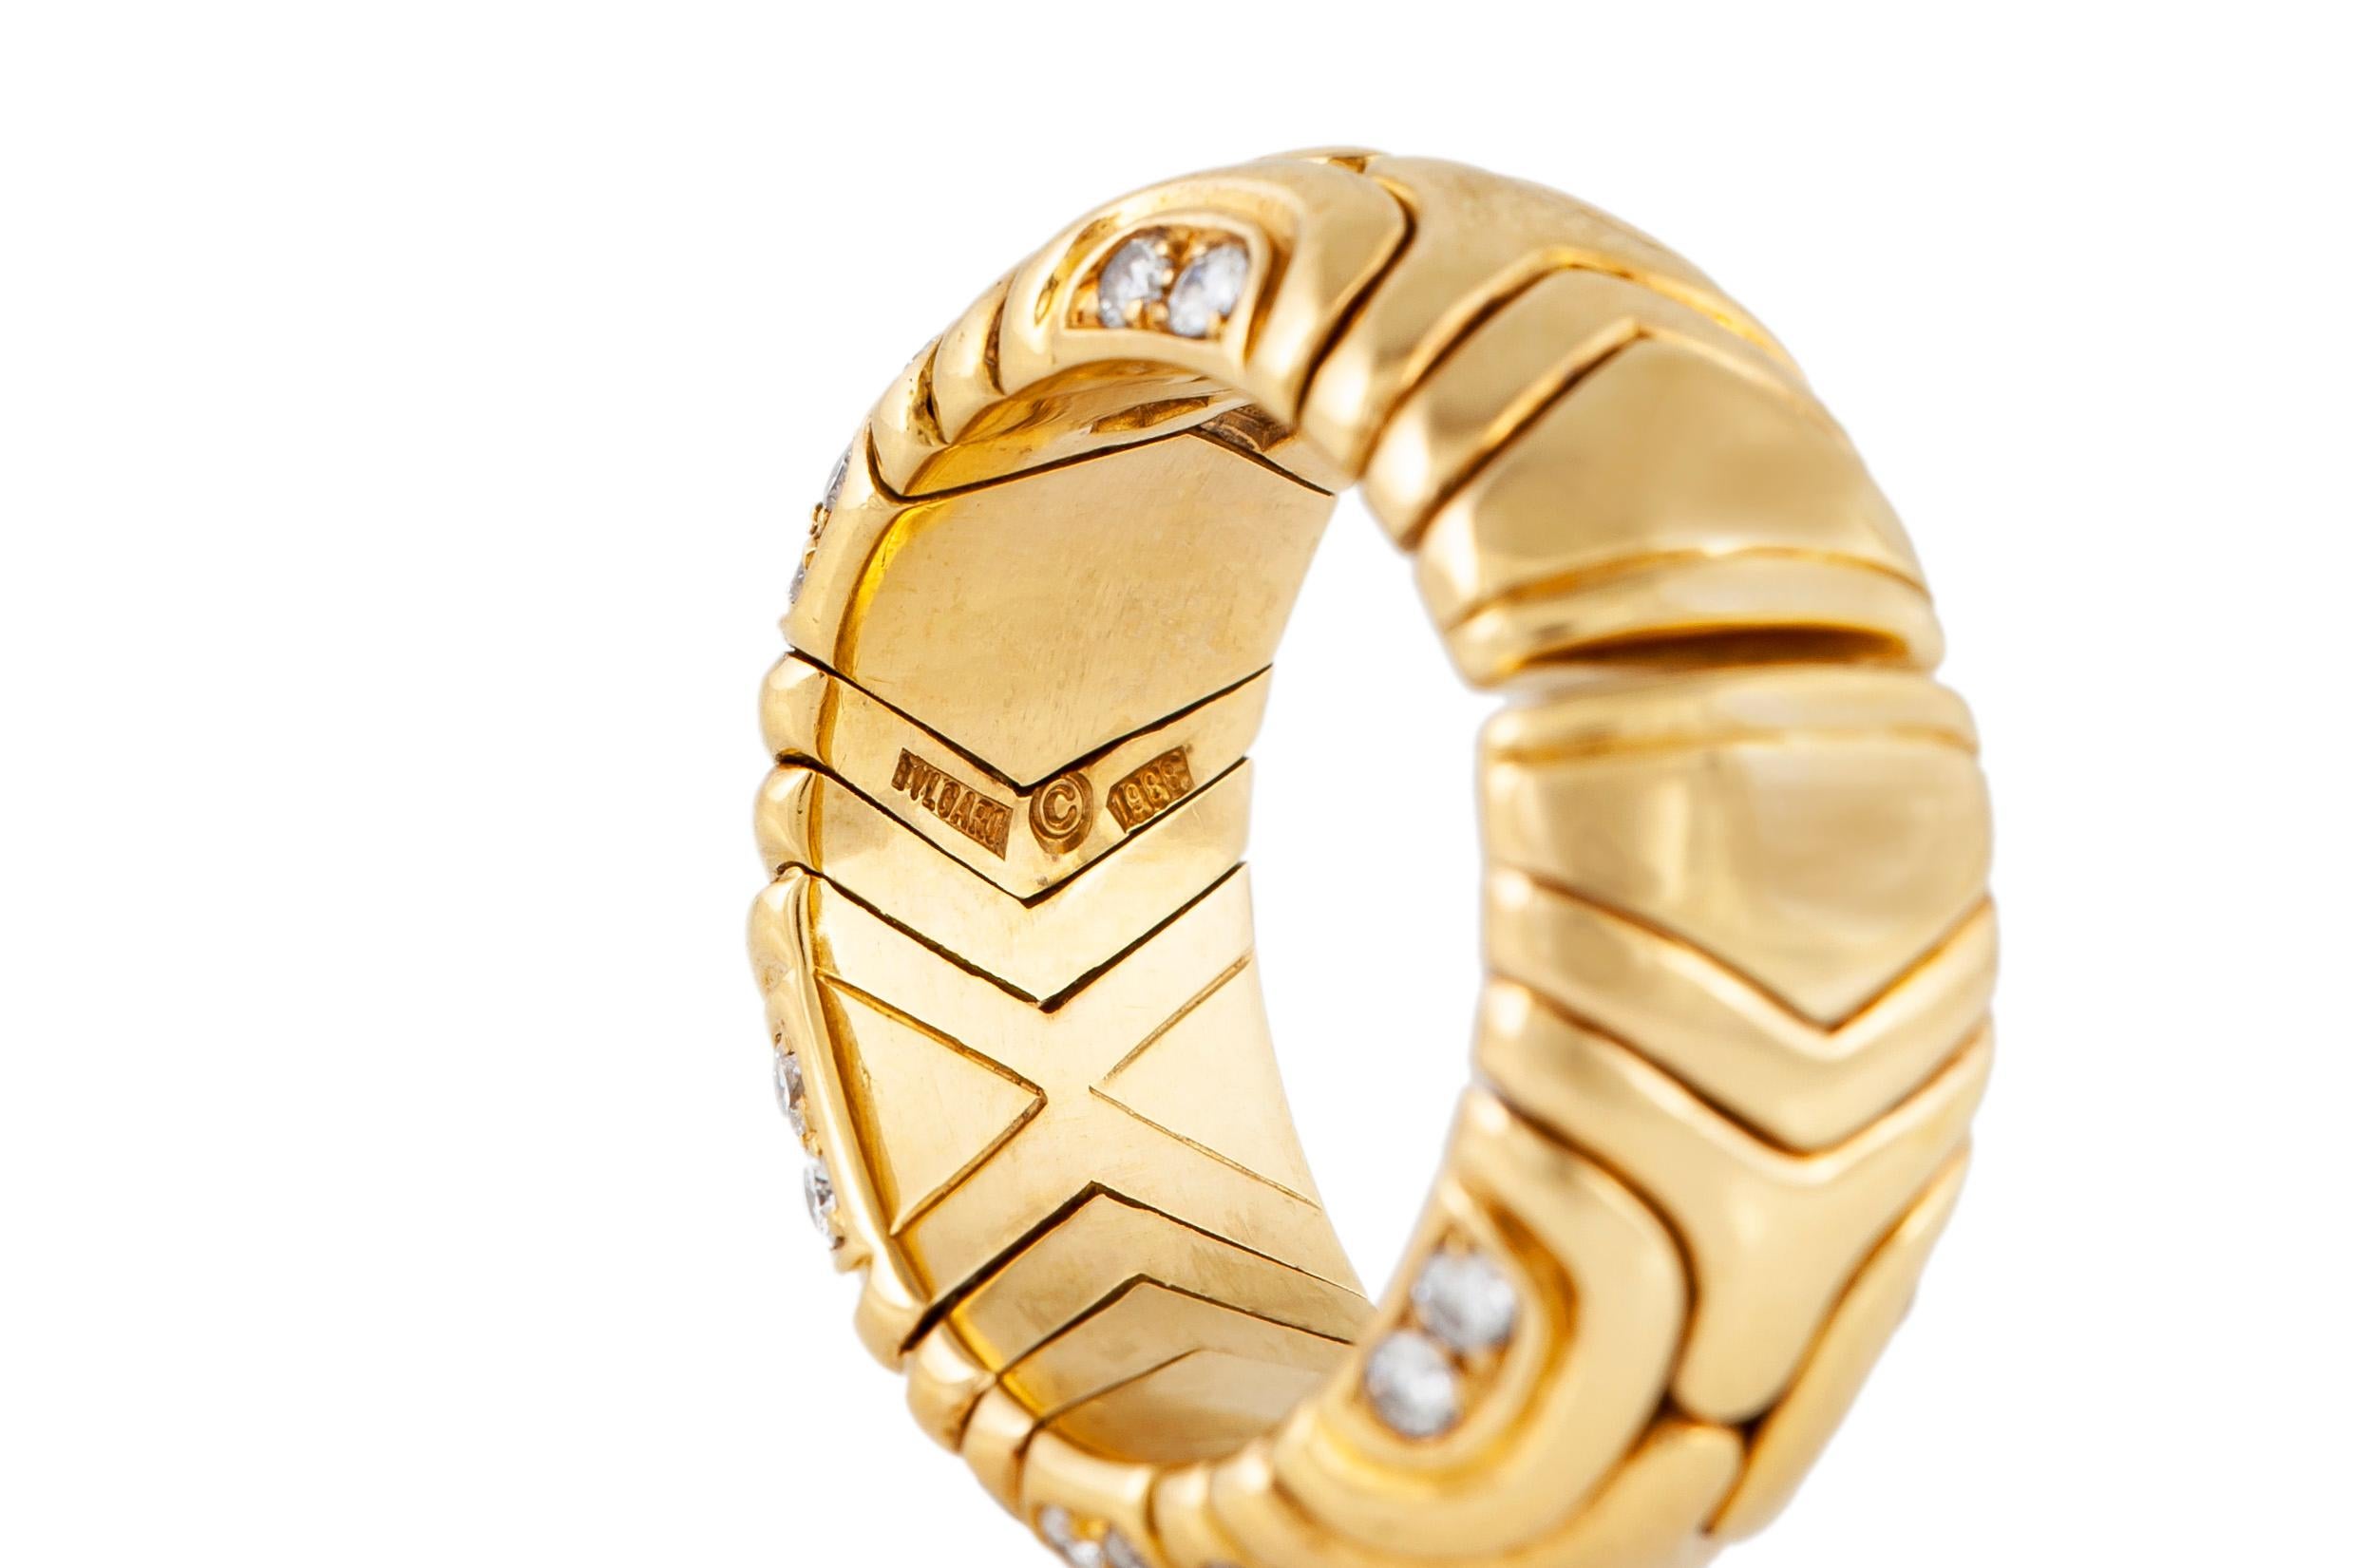 Original Bvlgari band, finely crafted in 18 k rose gold incrusted with brilliant cut diamonds. 